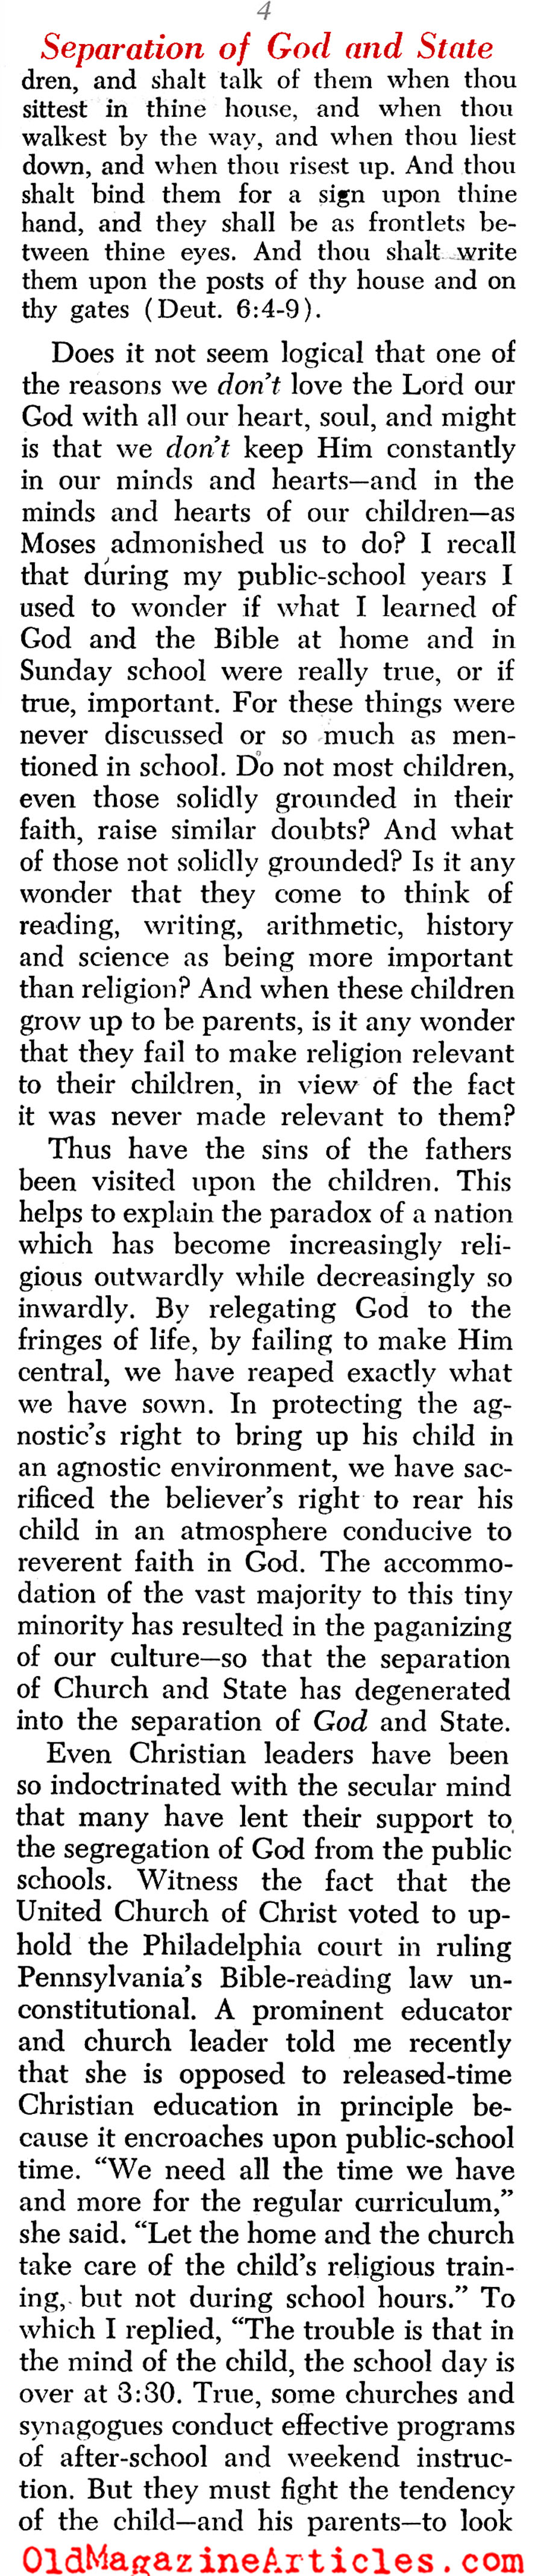 ''The Separation of God and State'' (Christian Herald, 1963)